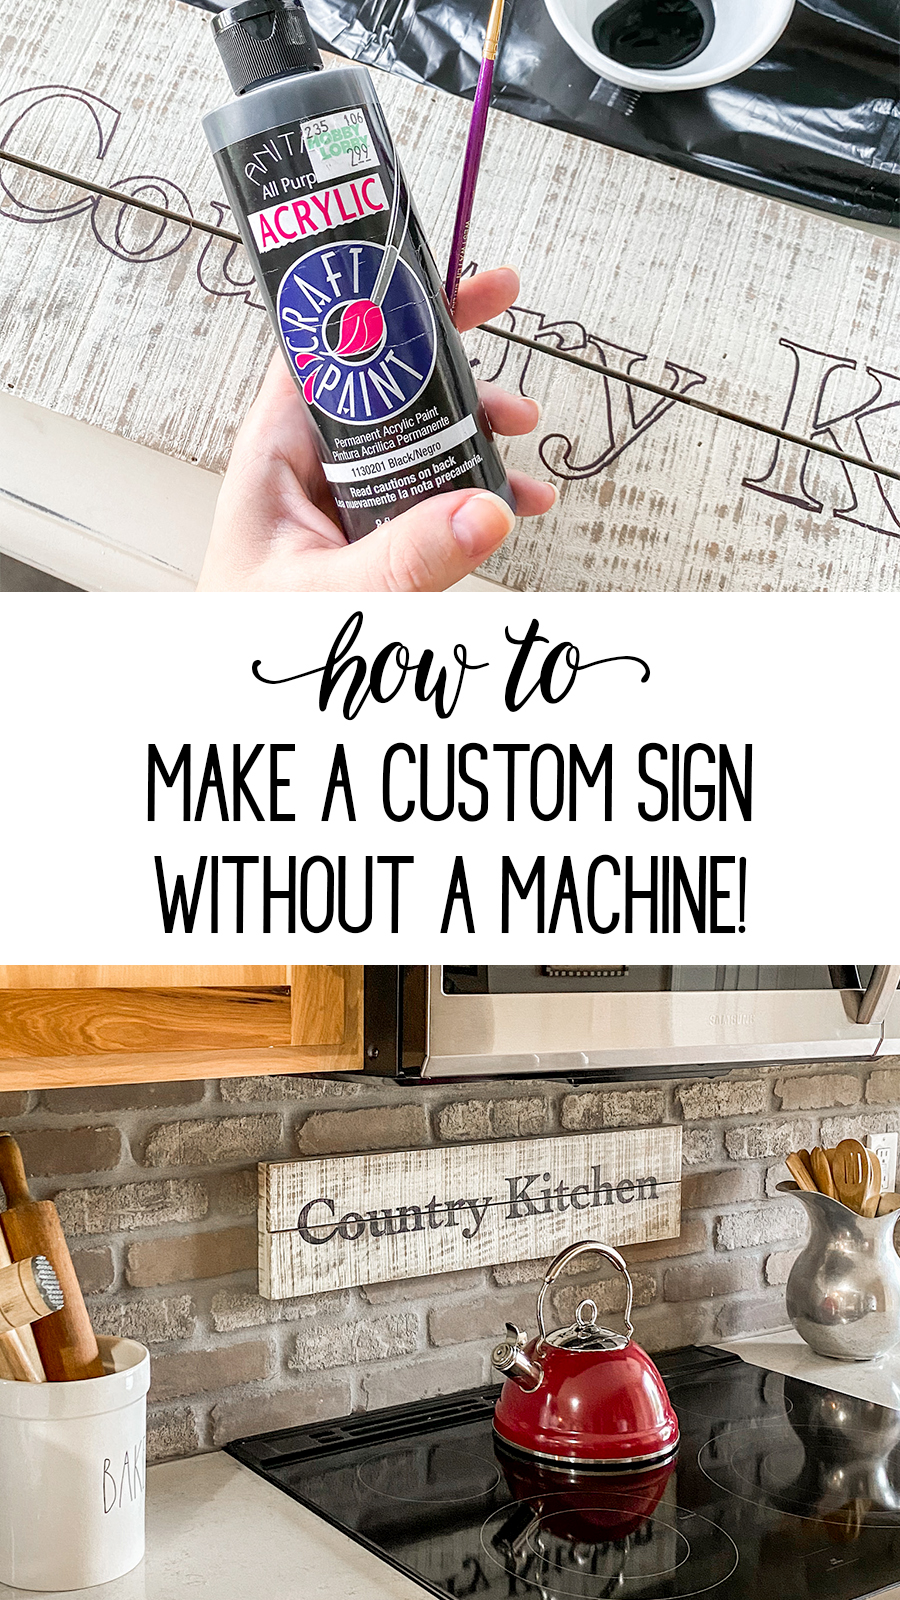 how to make a custom sign without a machine pinterest pin.